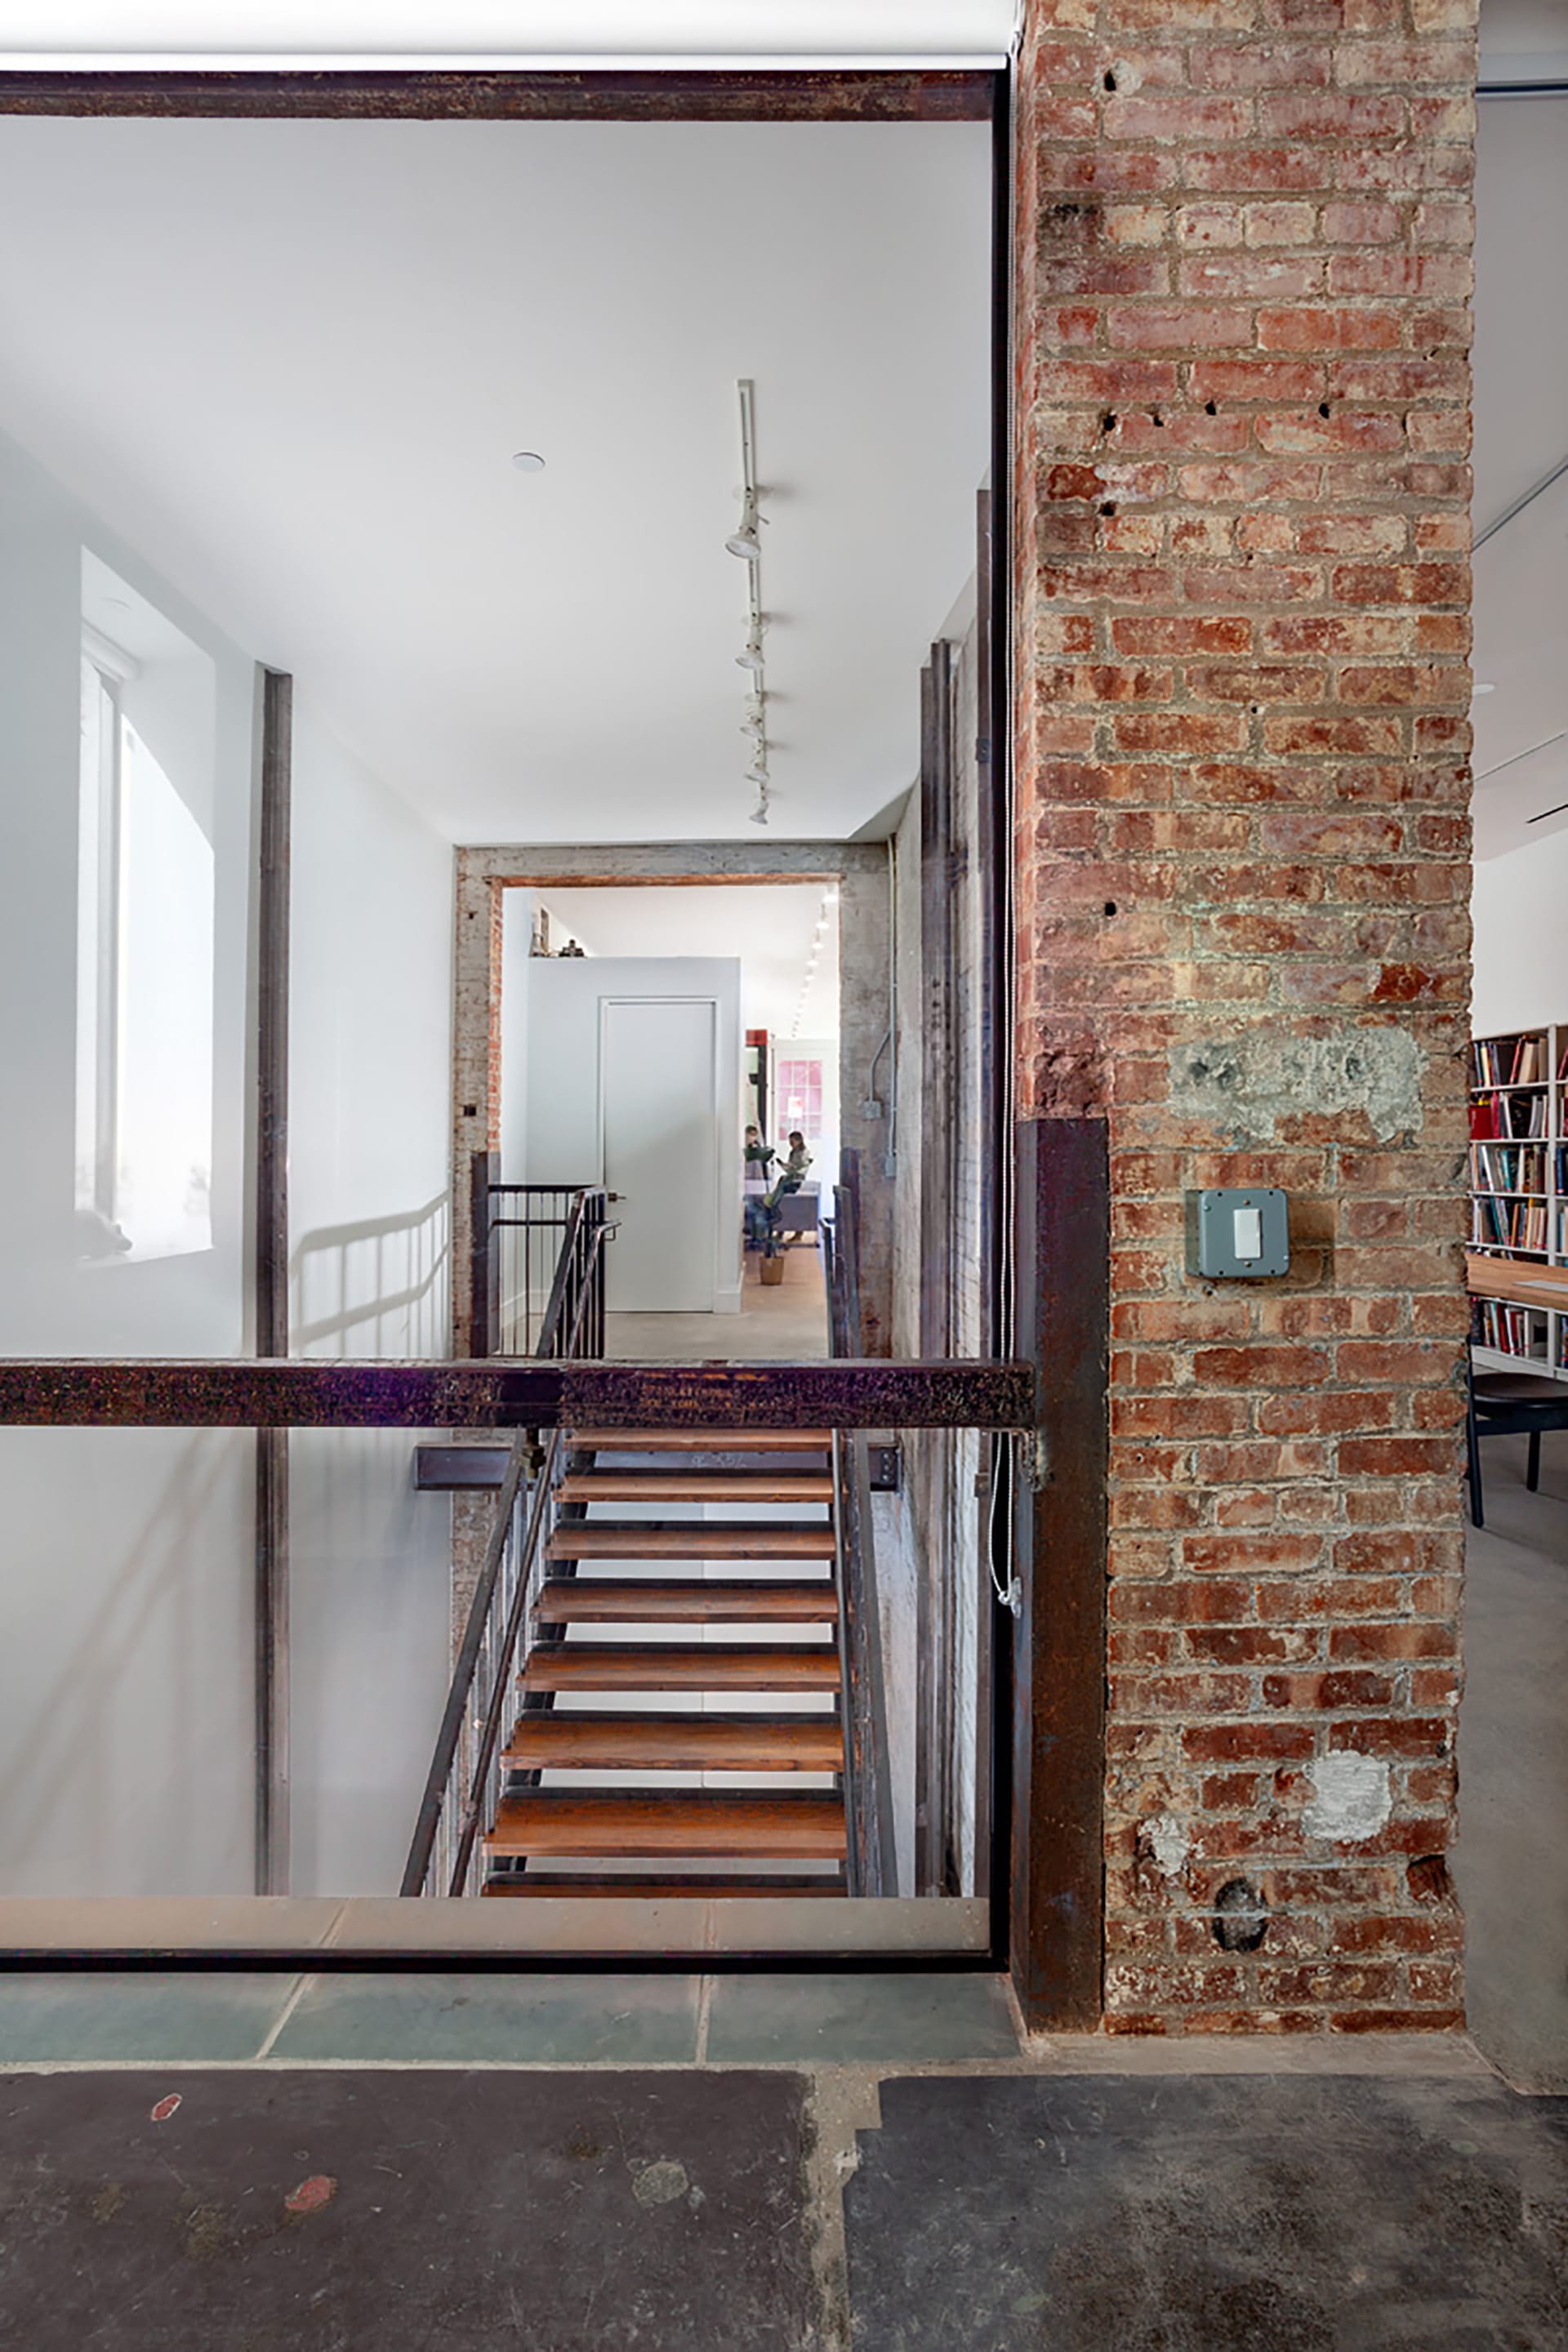 Elevator shaft with restored exposed brick converted into a stairwell.